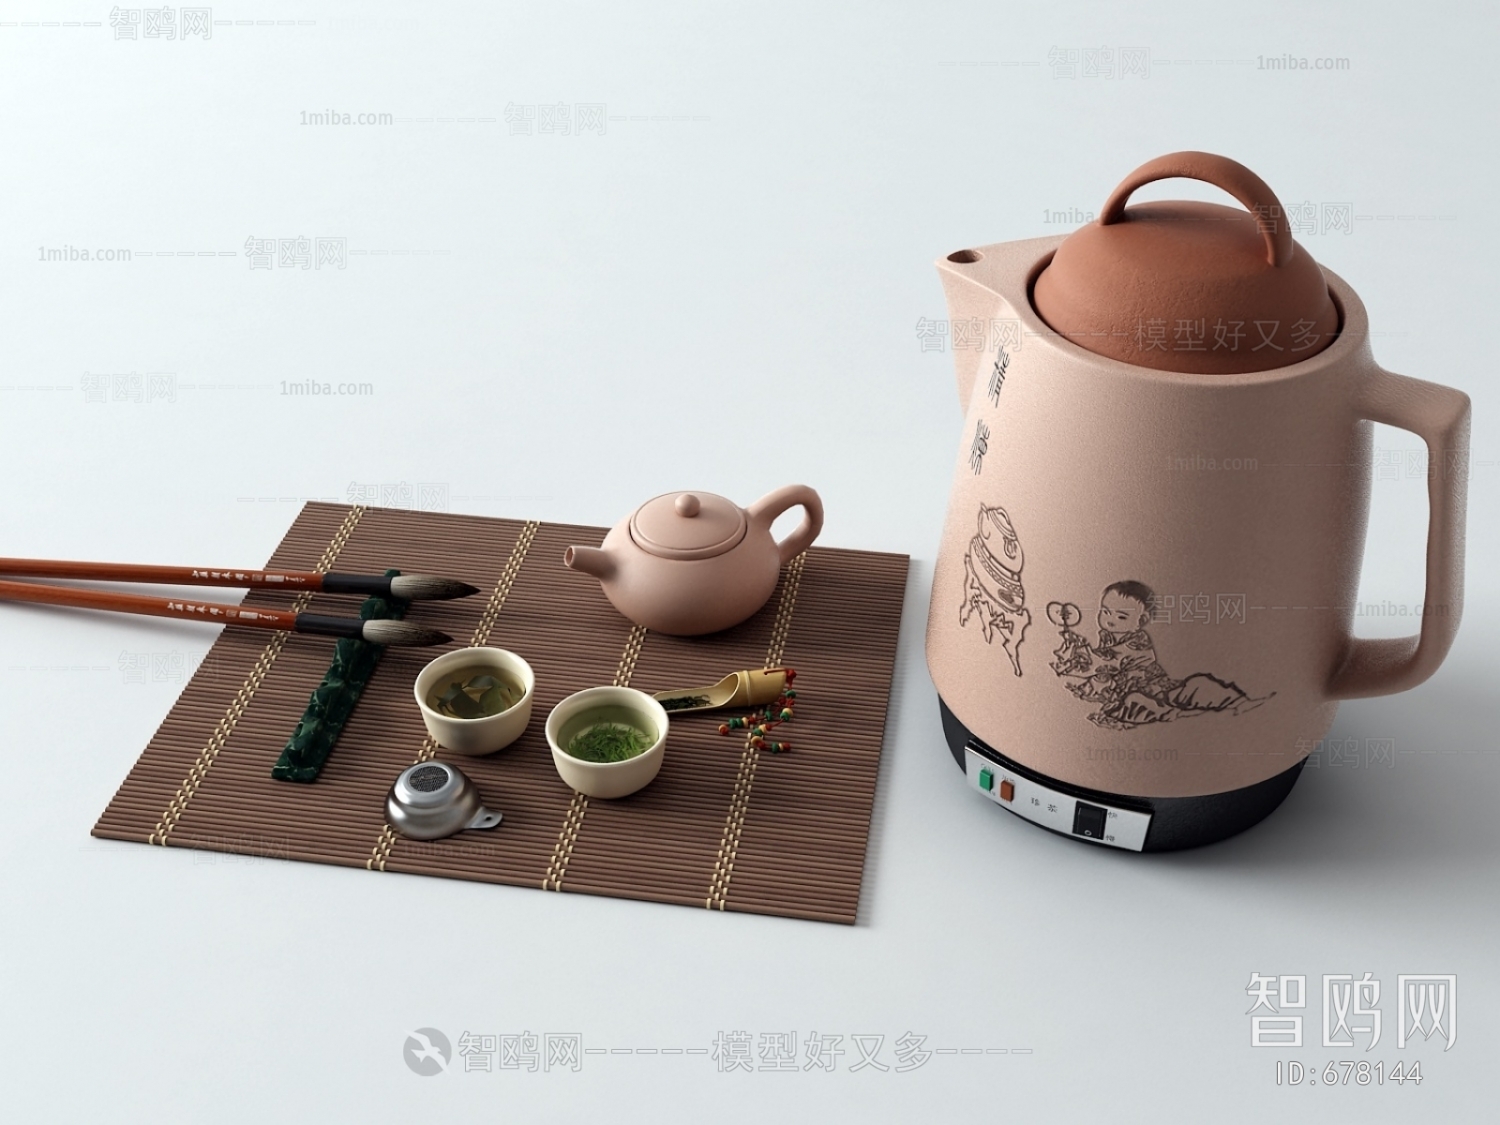 New Chinese Style Kitchen Appliance